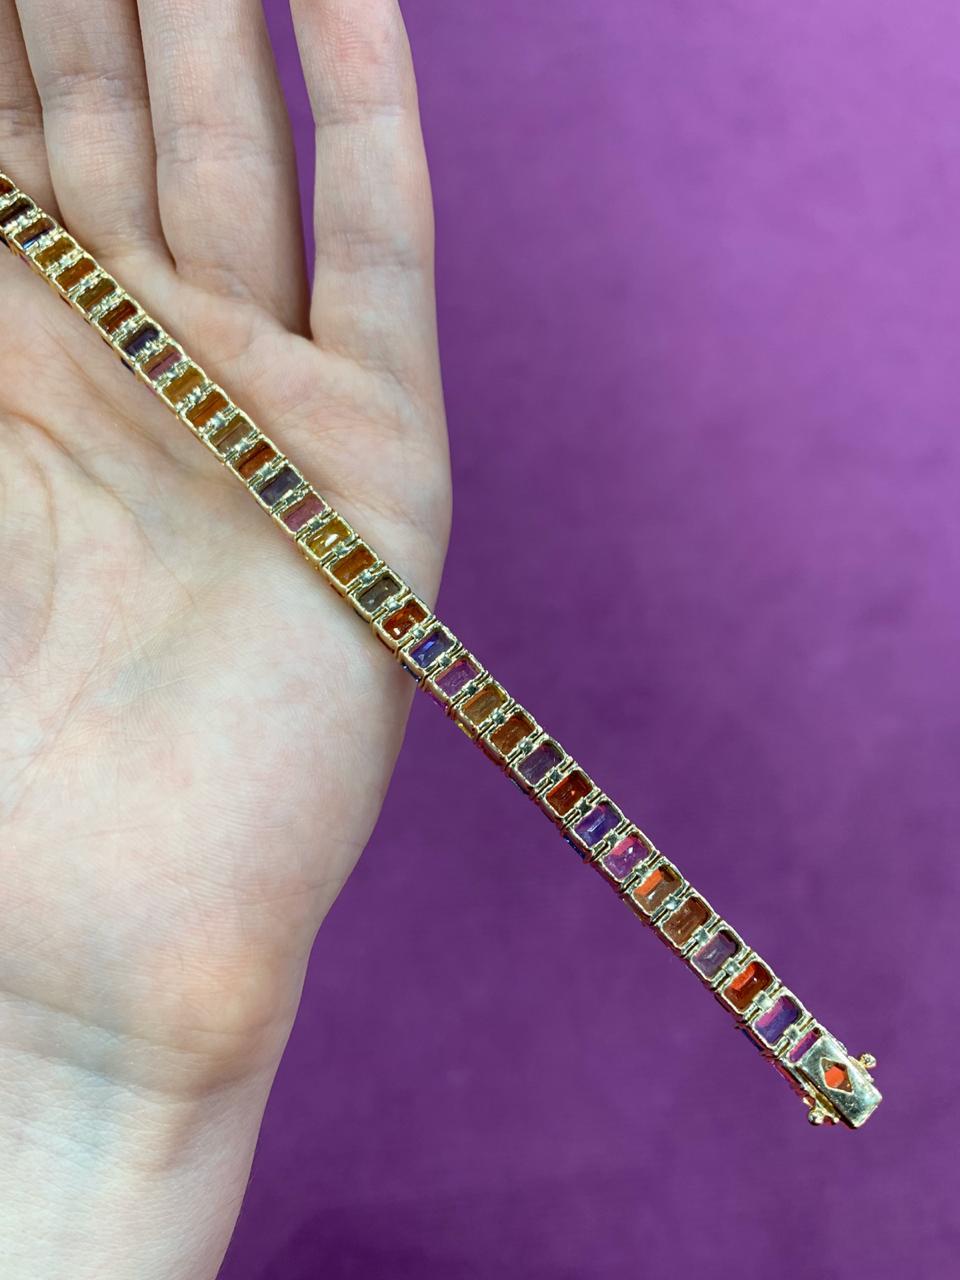 Bracelet Gold 14 K
Orange Sapphire 14-11,2
Green Sapphire 14-11,2
Pink Sapphire 7-5,6 2/2A
Red Sapphire 7-5,6 2/2A
Blue Sapphire 5,6 (2)/2
Weight 19,89 grams

With a heritage of ancient fine Swiss jewelry traditions, NATKINA is a Geneva based